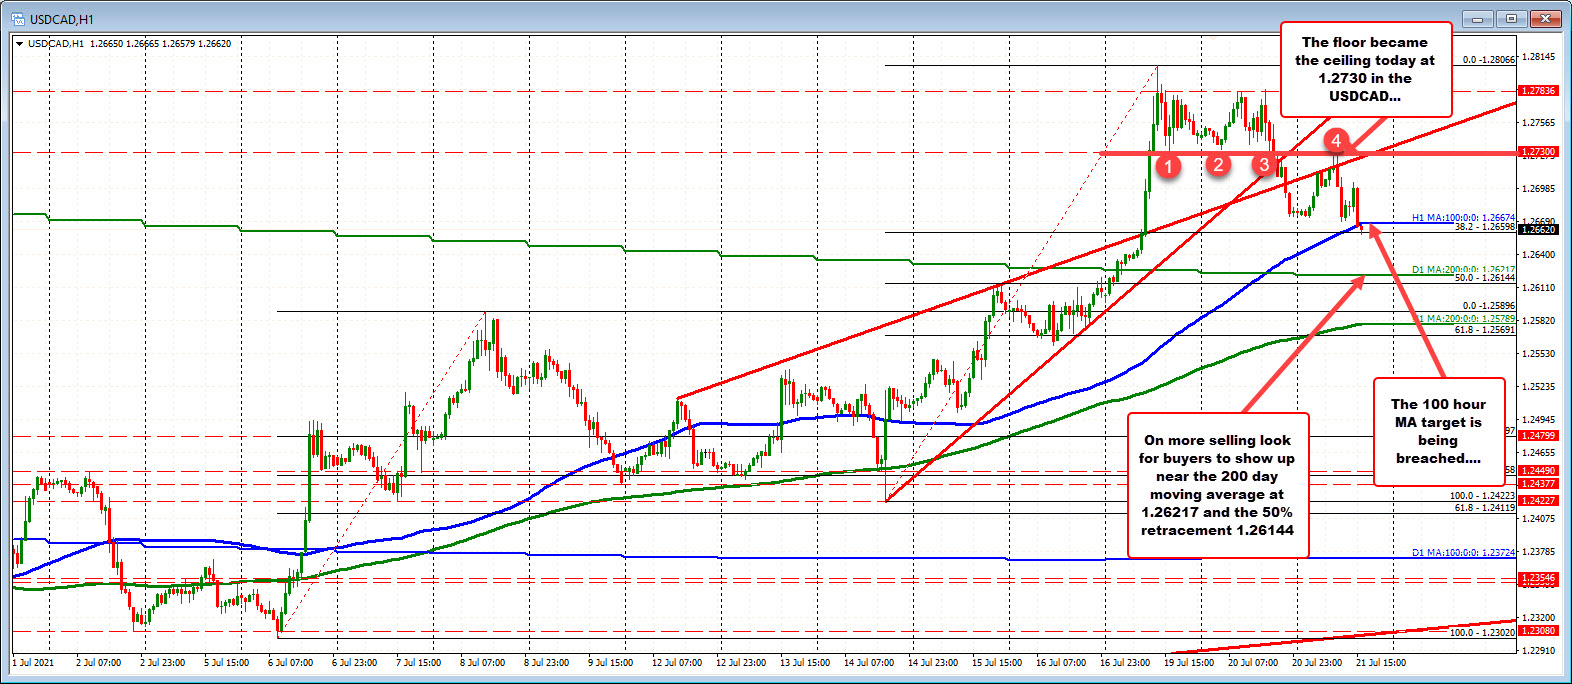 The up and down price action saw the USDCAD stall at an floor on the hourly chart.